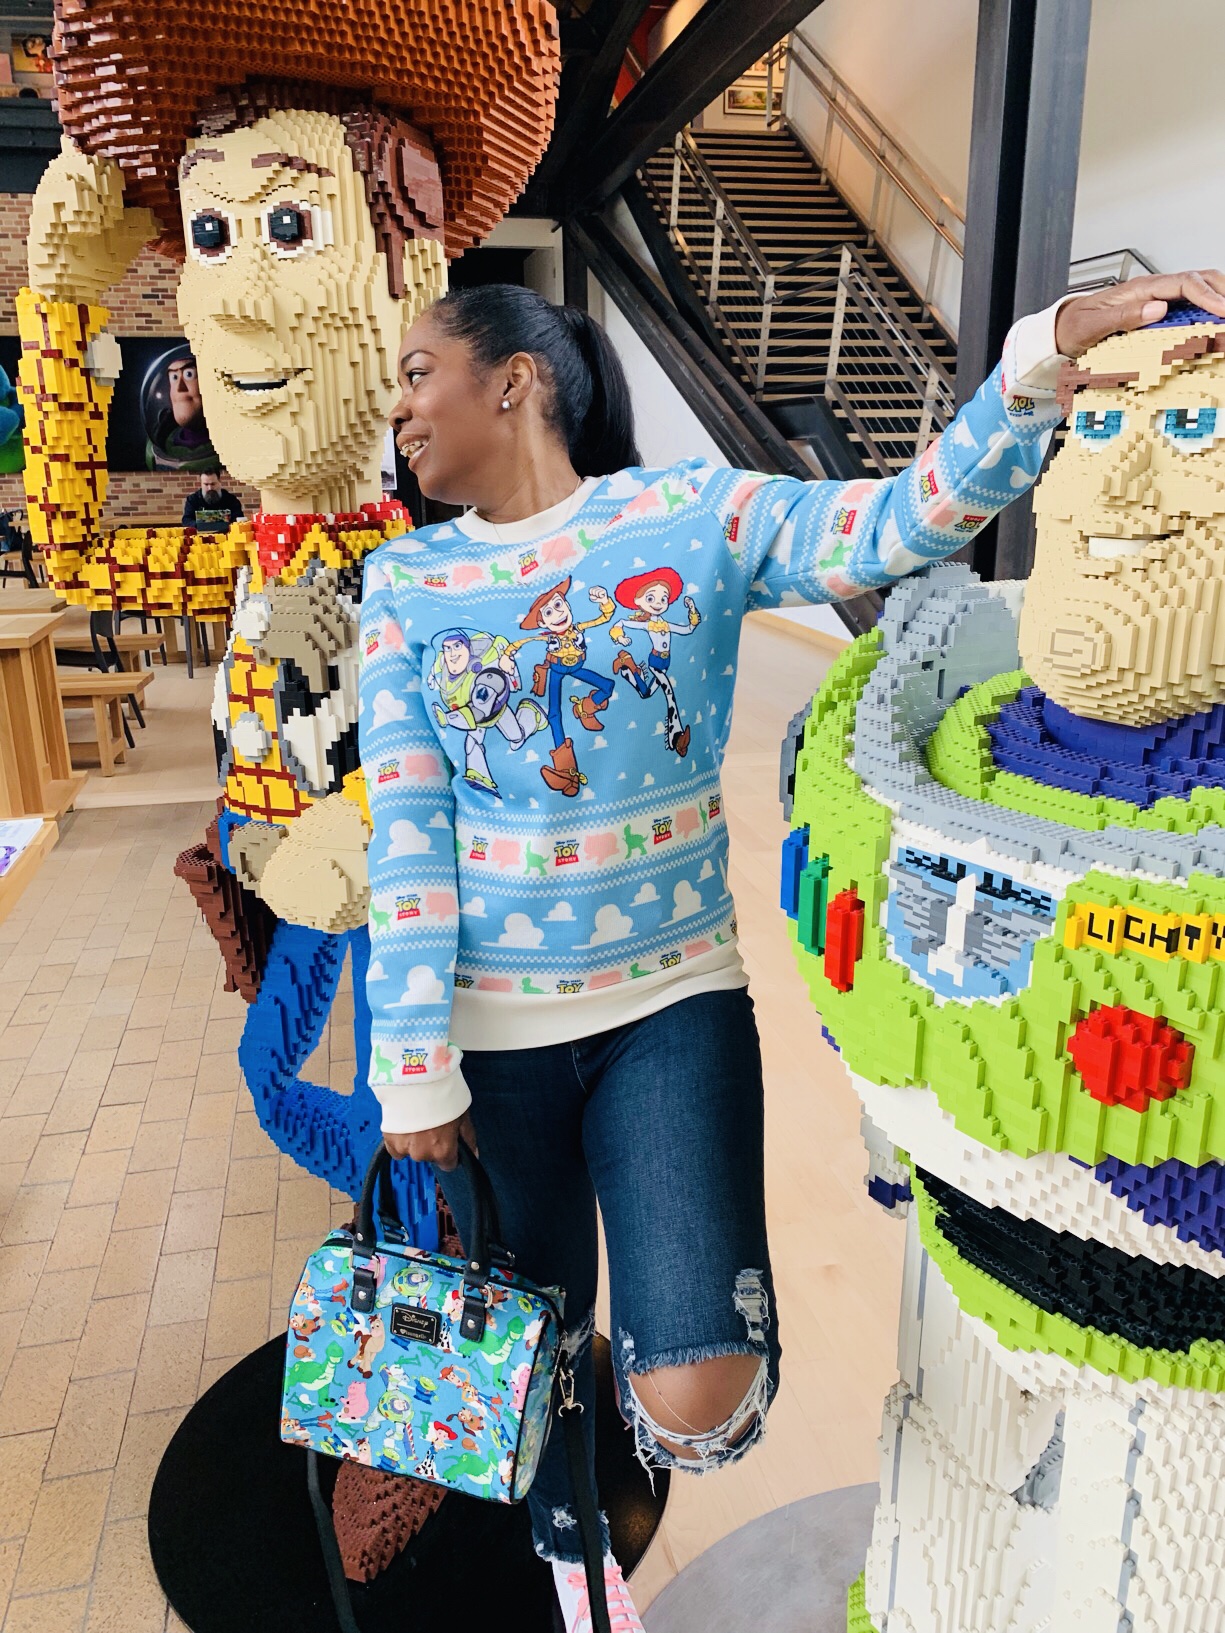 My Style: Toy Story Sweater & Purse While At Pixar Animation Studio